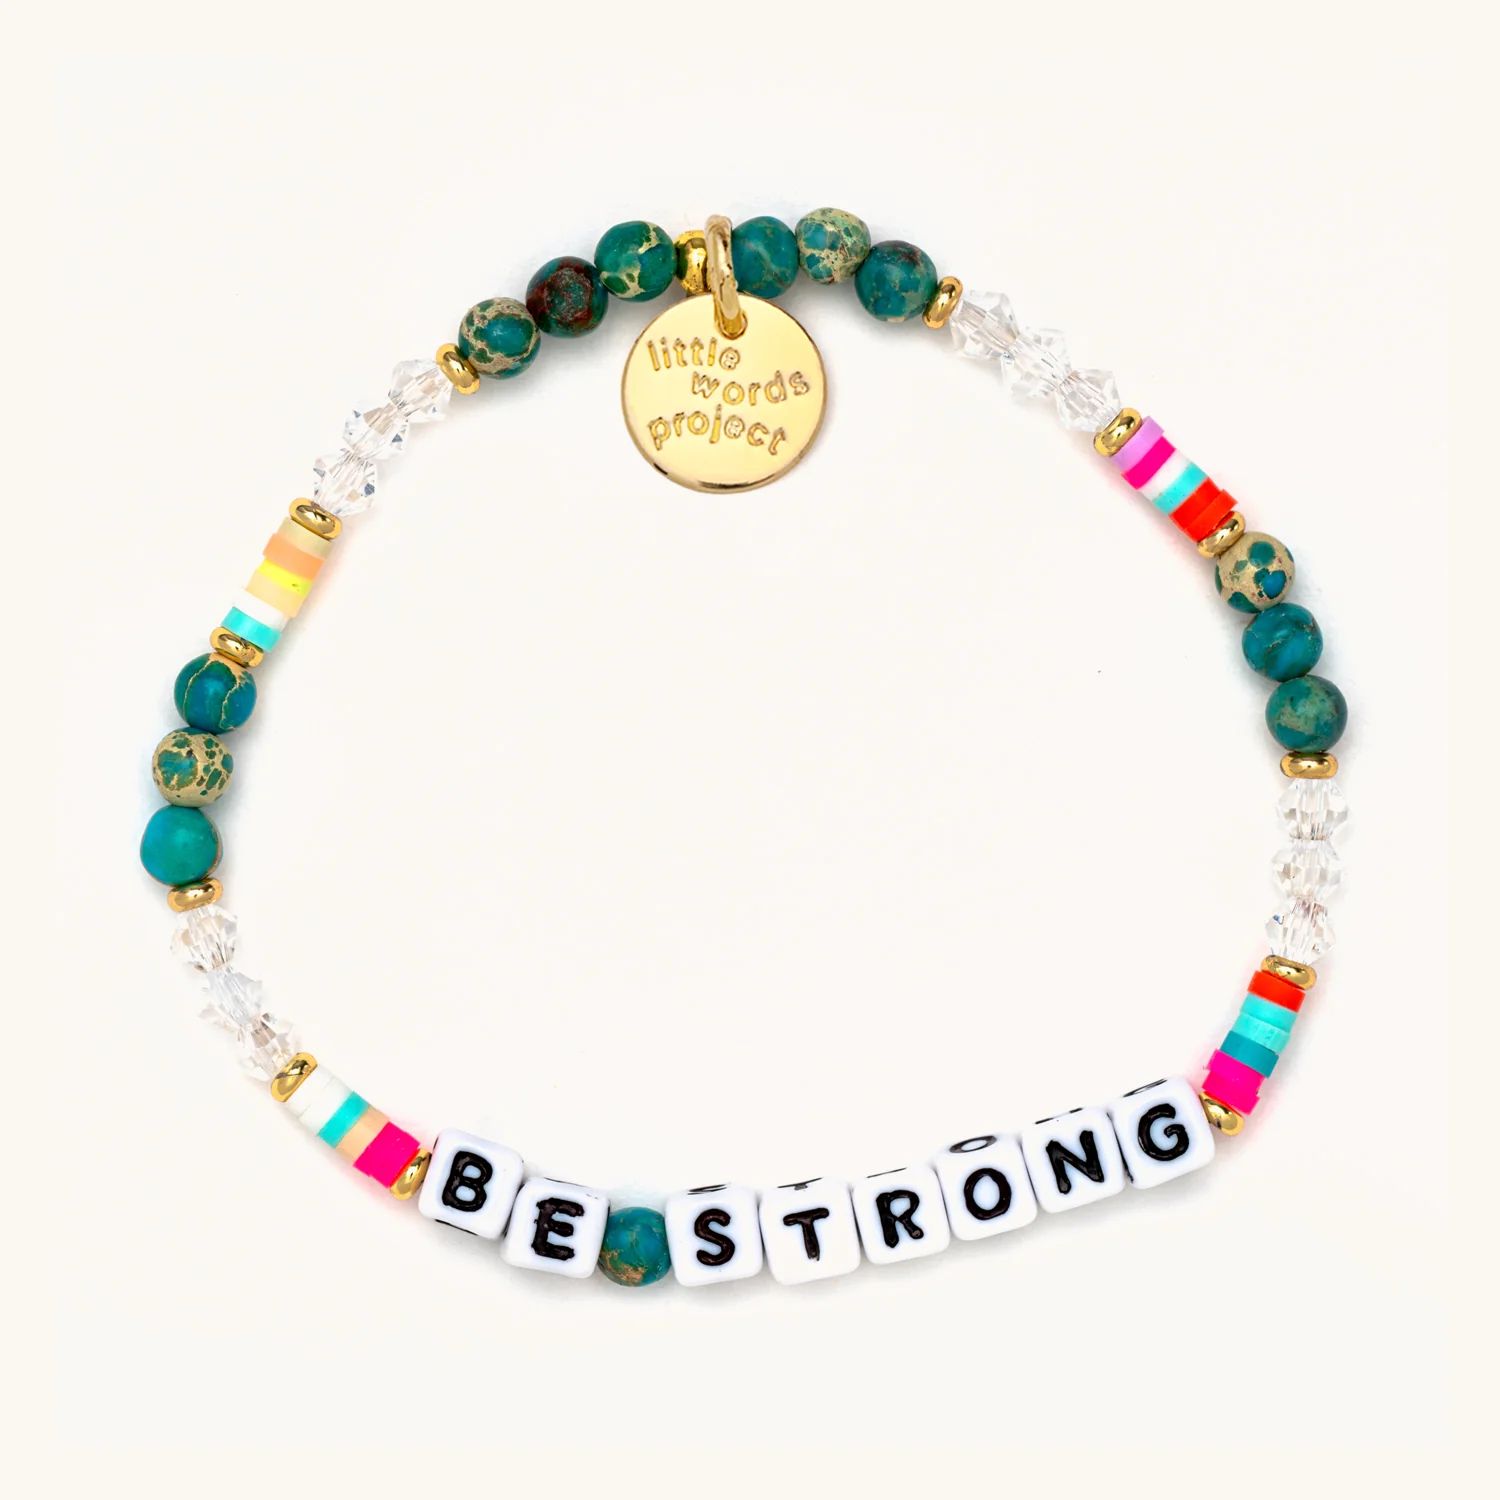 Be Strong- Best Of | Little Words Project